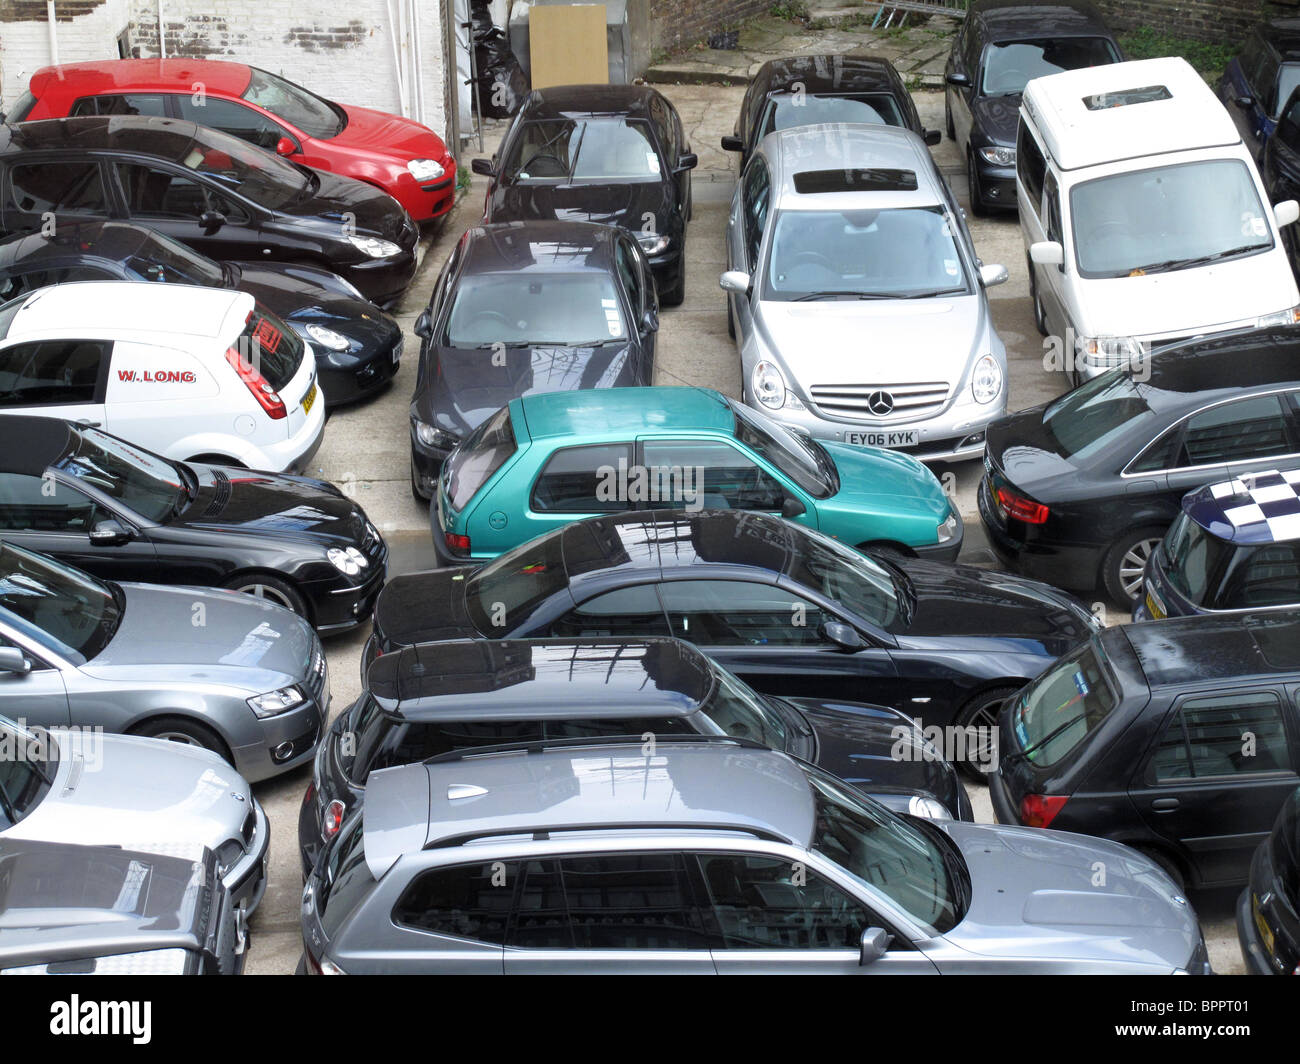 London car park. Maximising space by parking cars close together Stock Photo